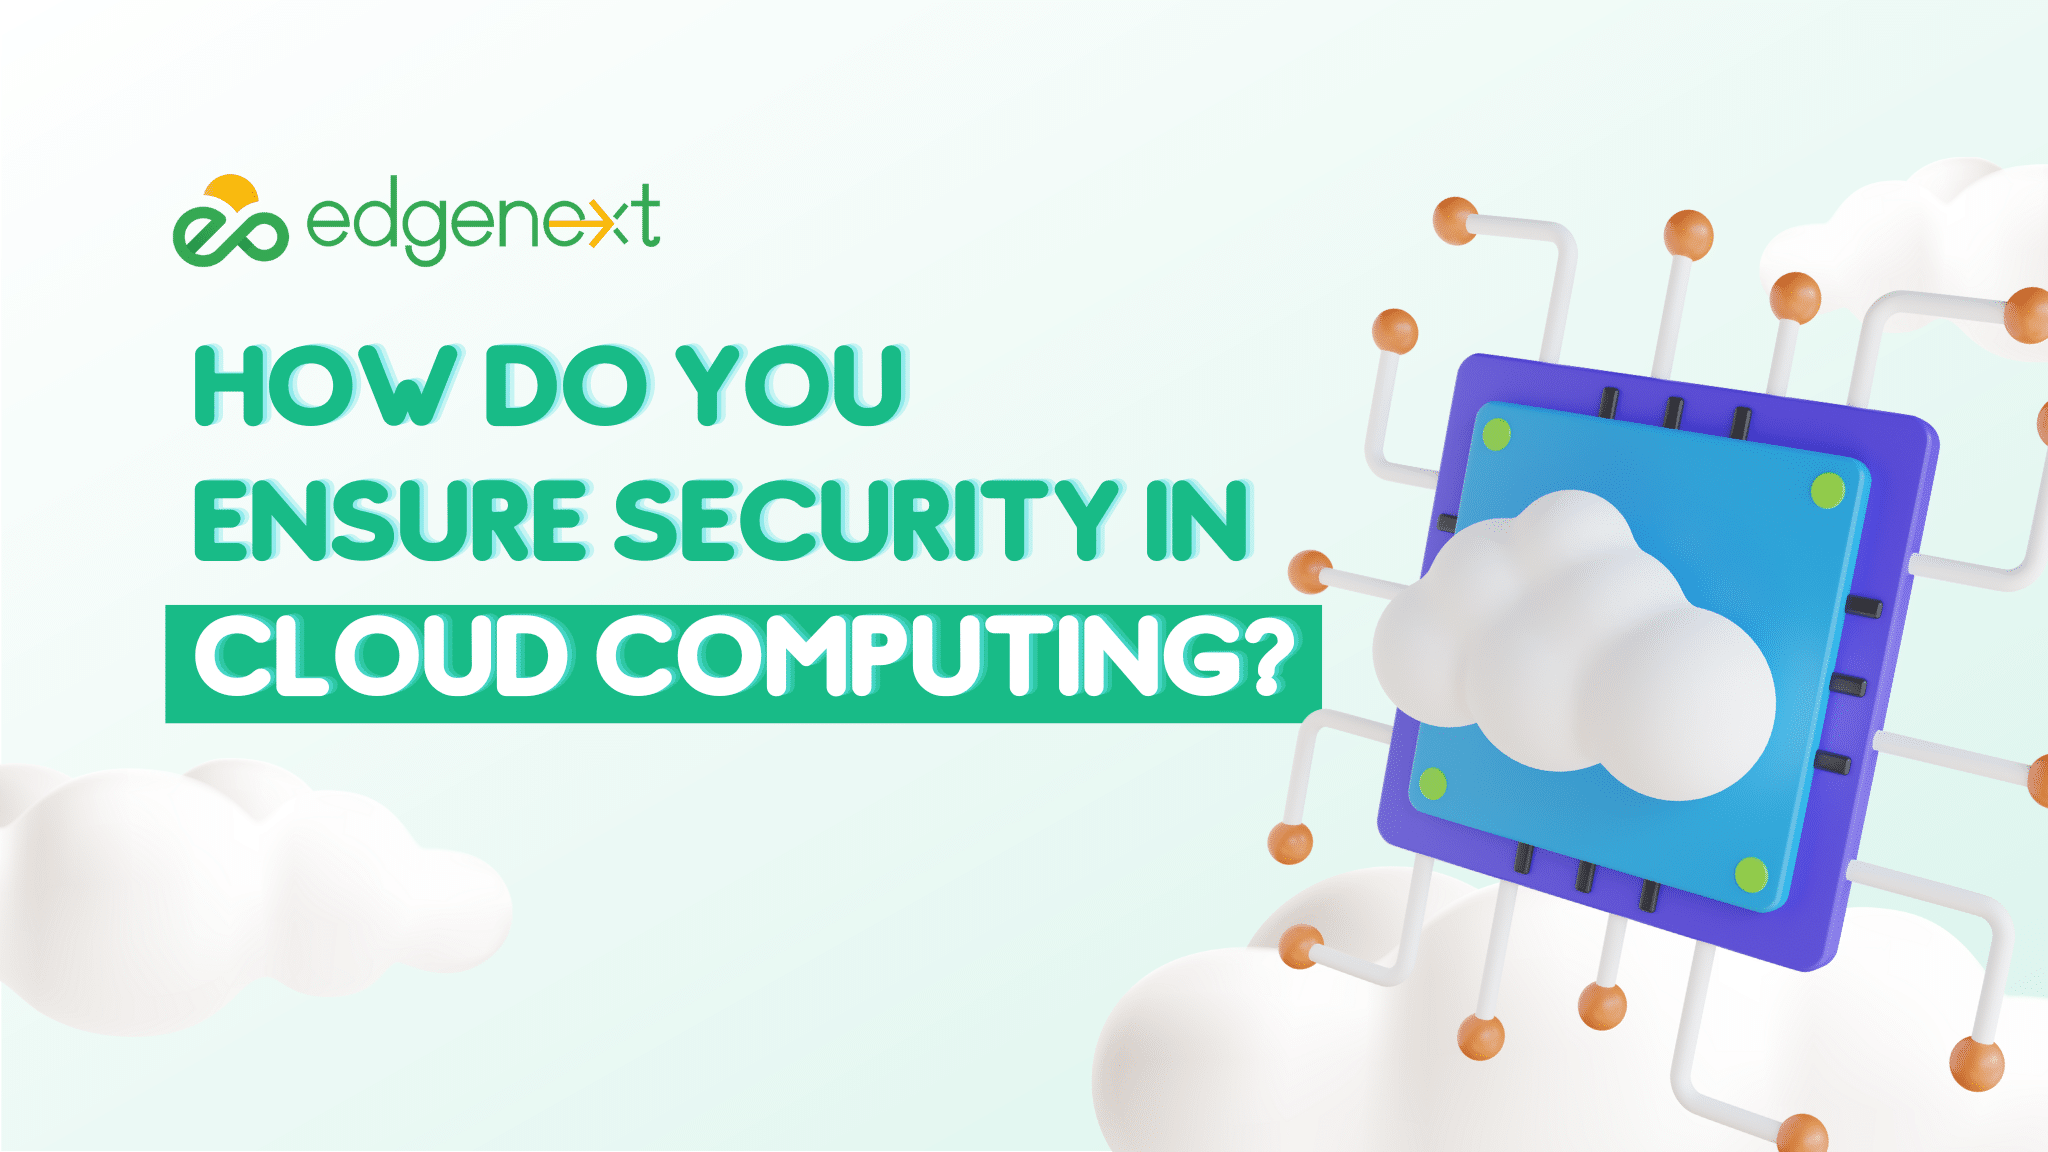 How do you ensure security in cloud computing?